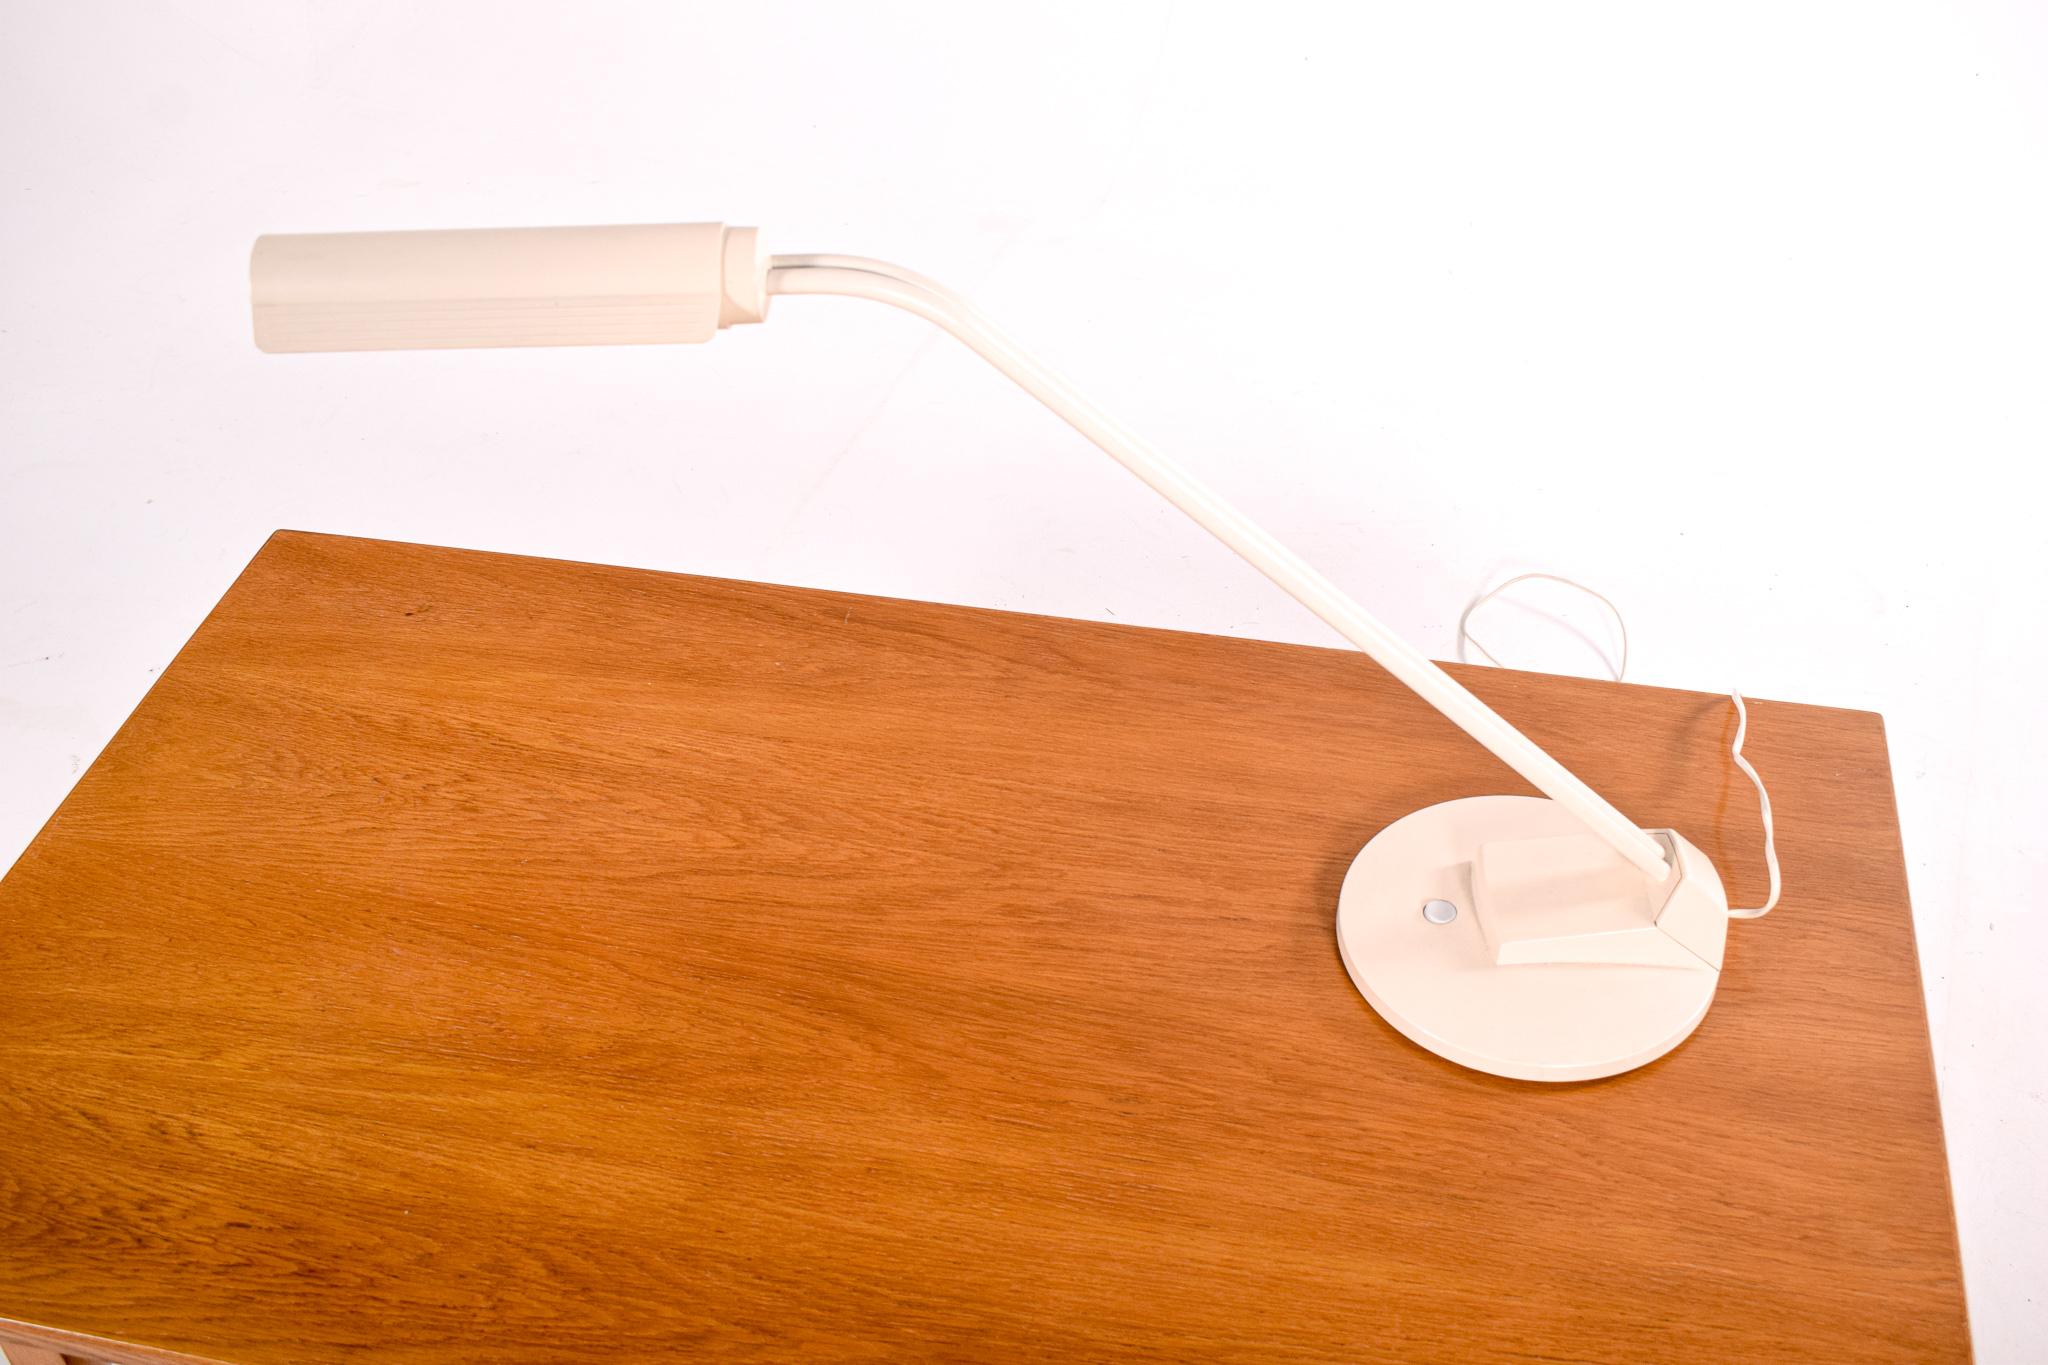 White Osram Dulux table lamp made in germany. With its sophisticated workmanship, the table lamp ensures an greater working and reading light. Compact lamp head with rotatable glare protection.